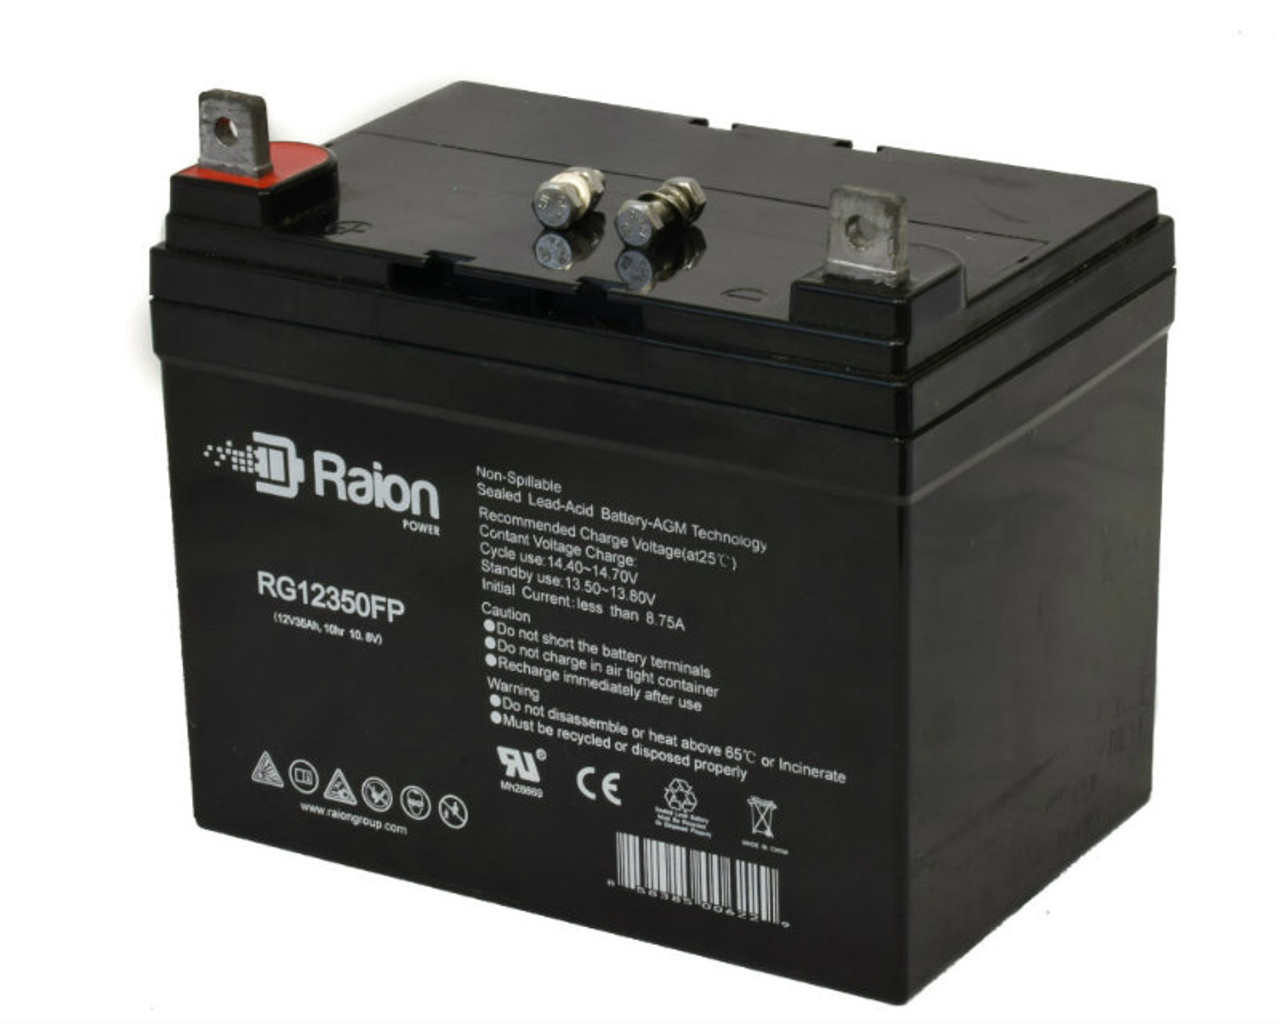 Raion Power Replacement 12V 35Ah RG12350FP Mobility Scooter Battery for Golden Technologies Buzzaround Extreme GB148